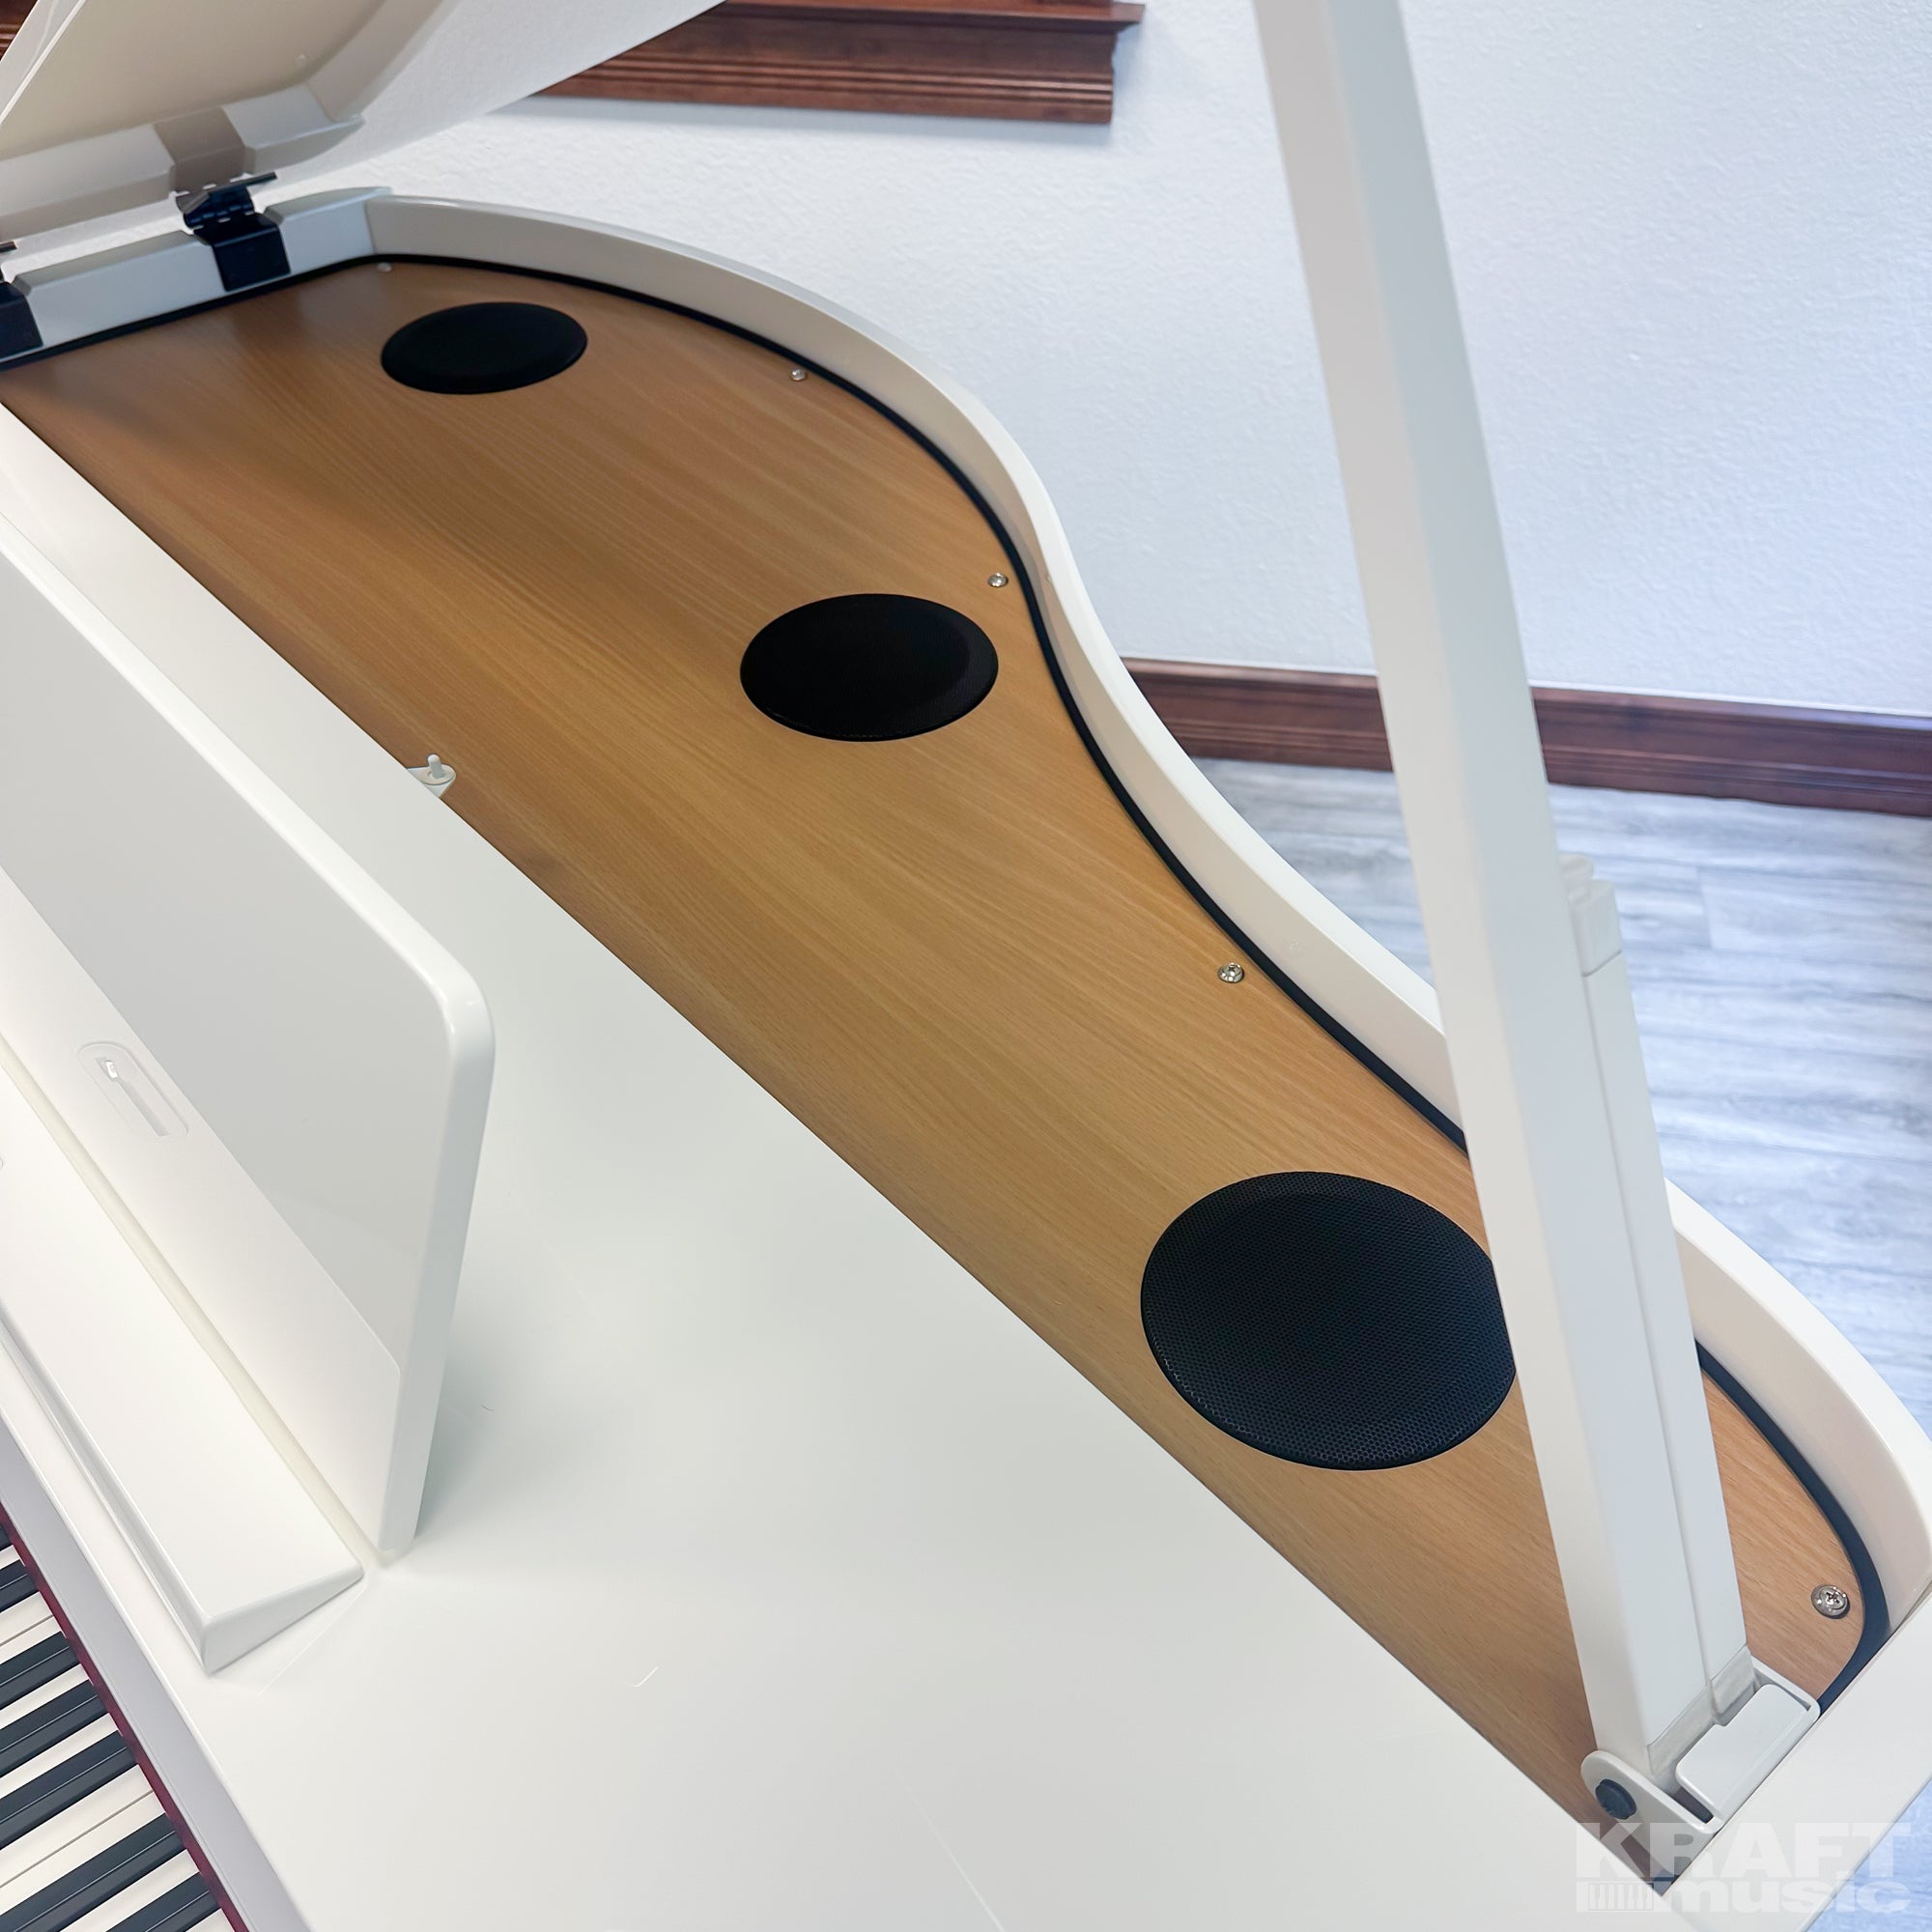 Roland GP-6 Digital Grand Piano - Polished White - under lid view